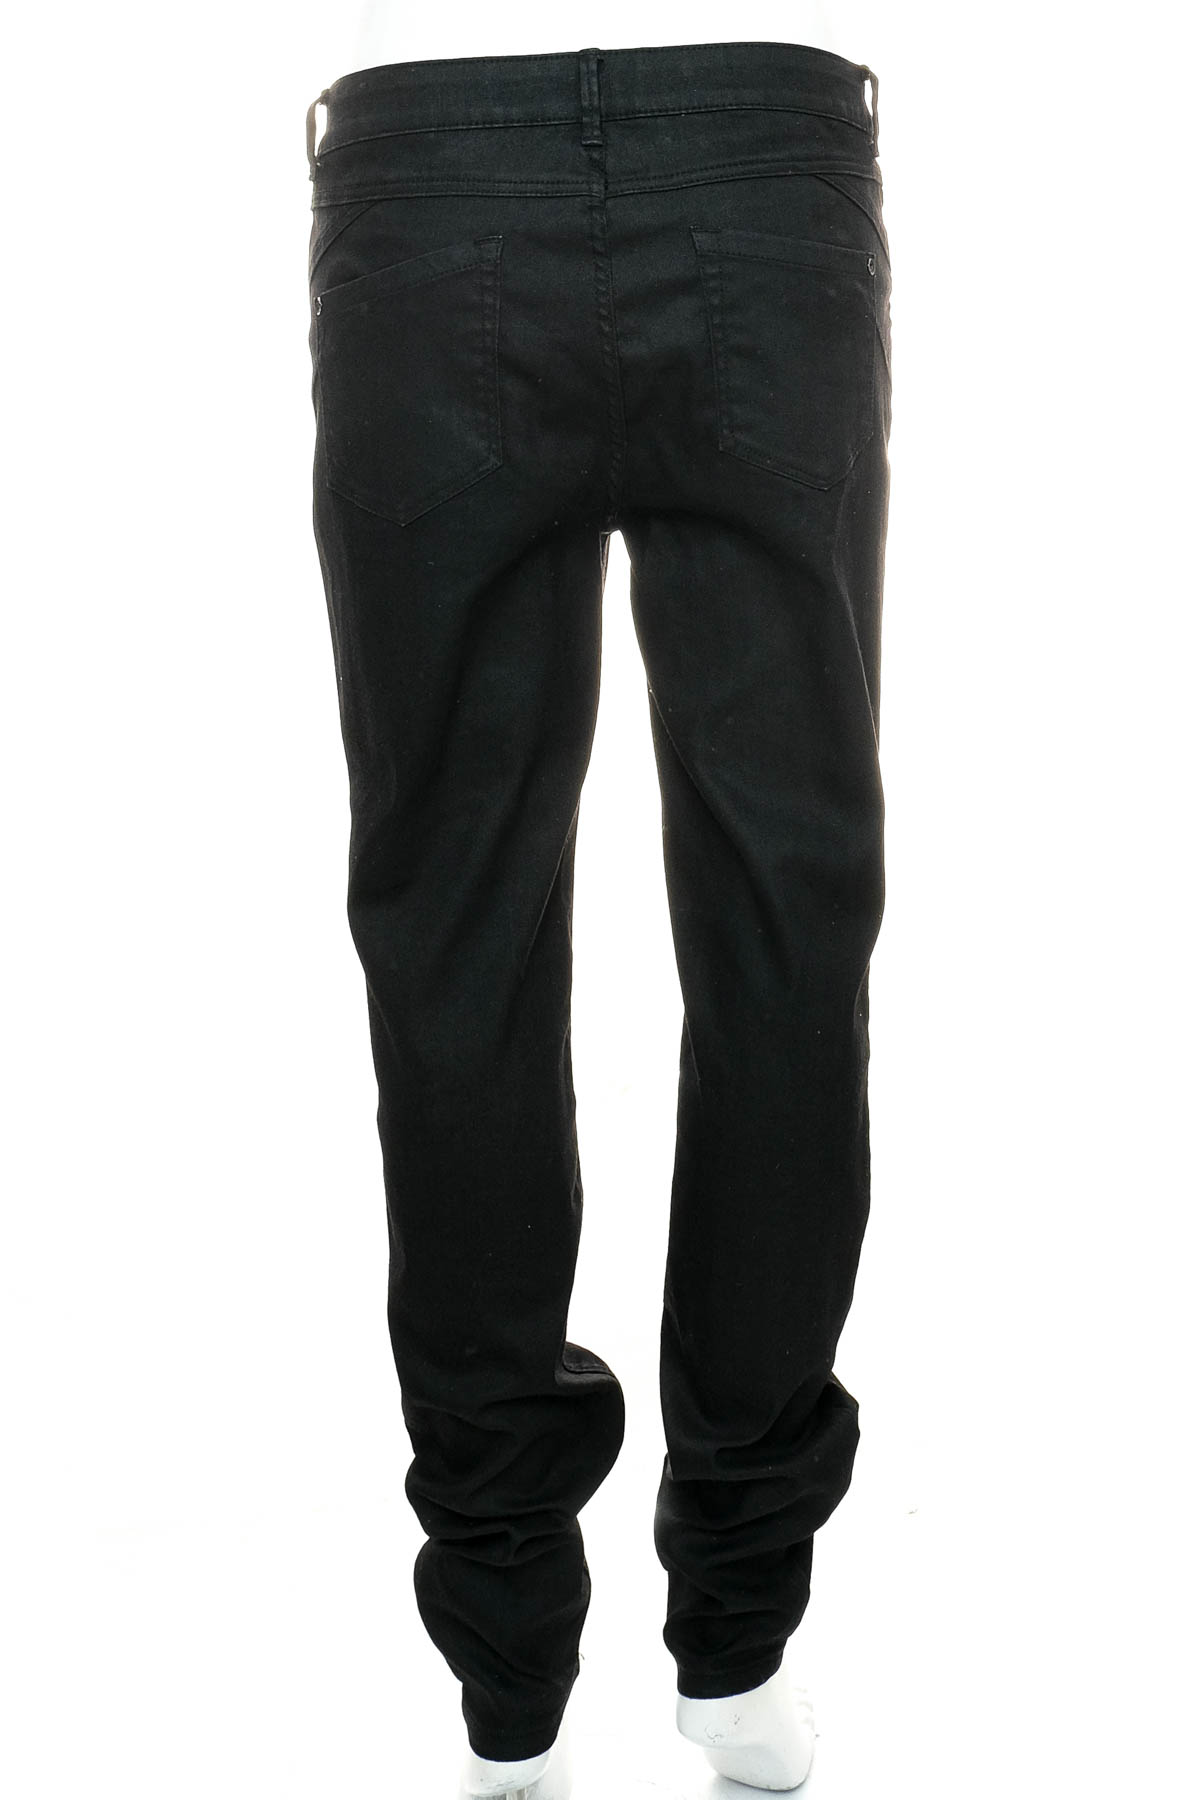 Women's trousers - S.Oliver BLACK LABEL - 1